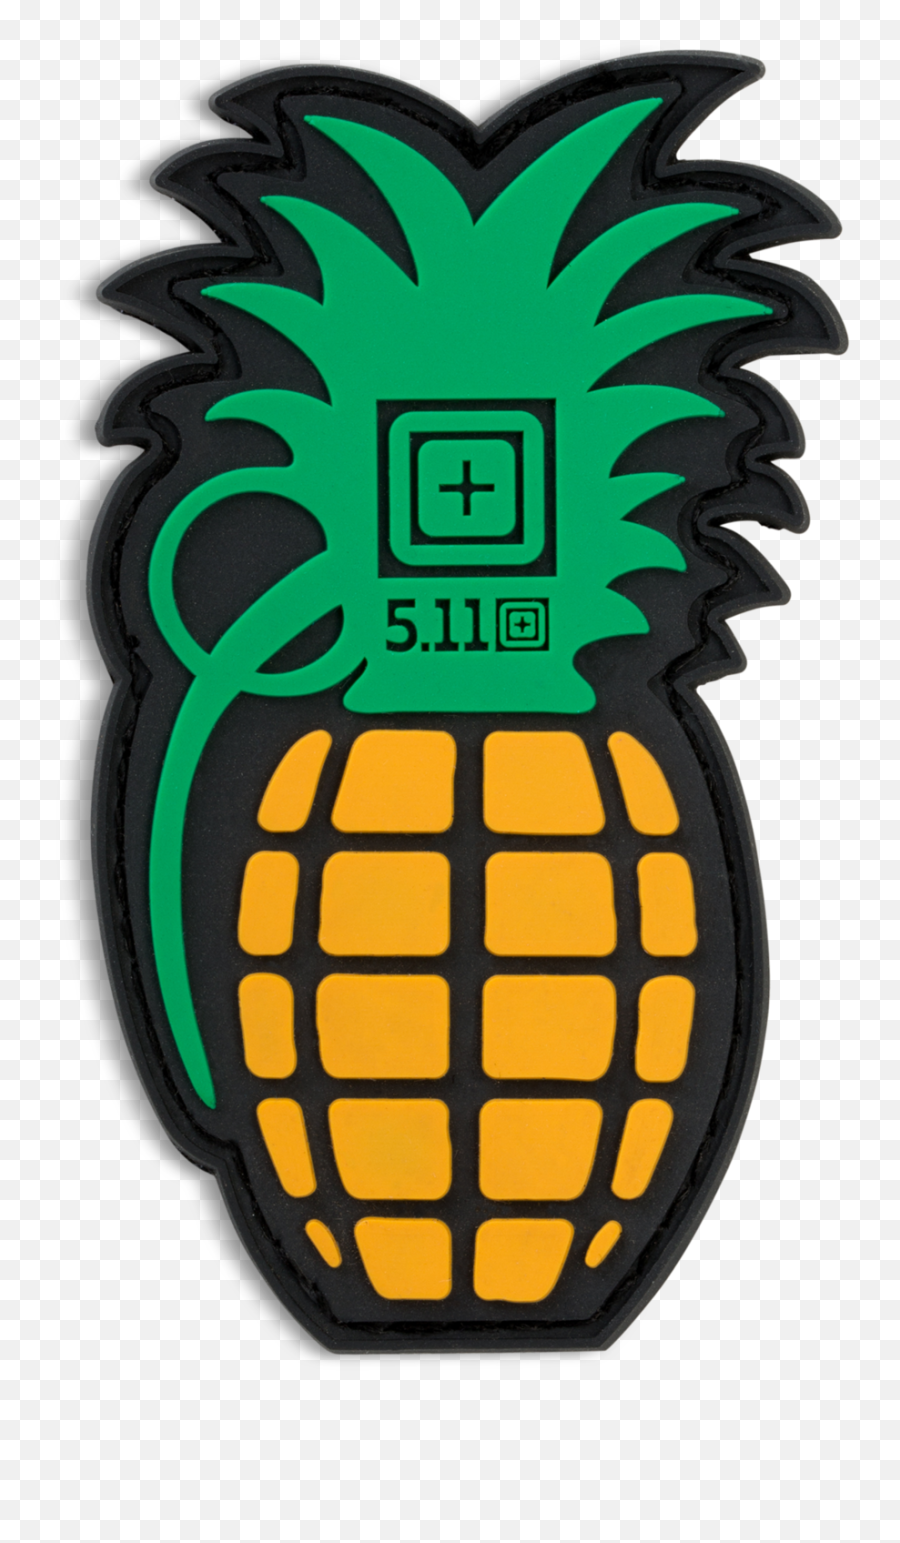 Pineapple Grenade Patch - 511 Tactical Pineapple Grenade Patch Png,Pineapple Logo